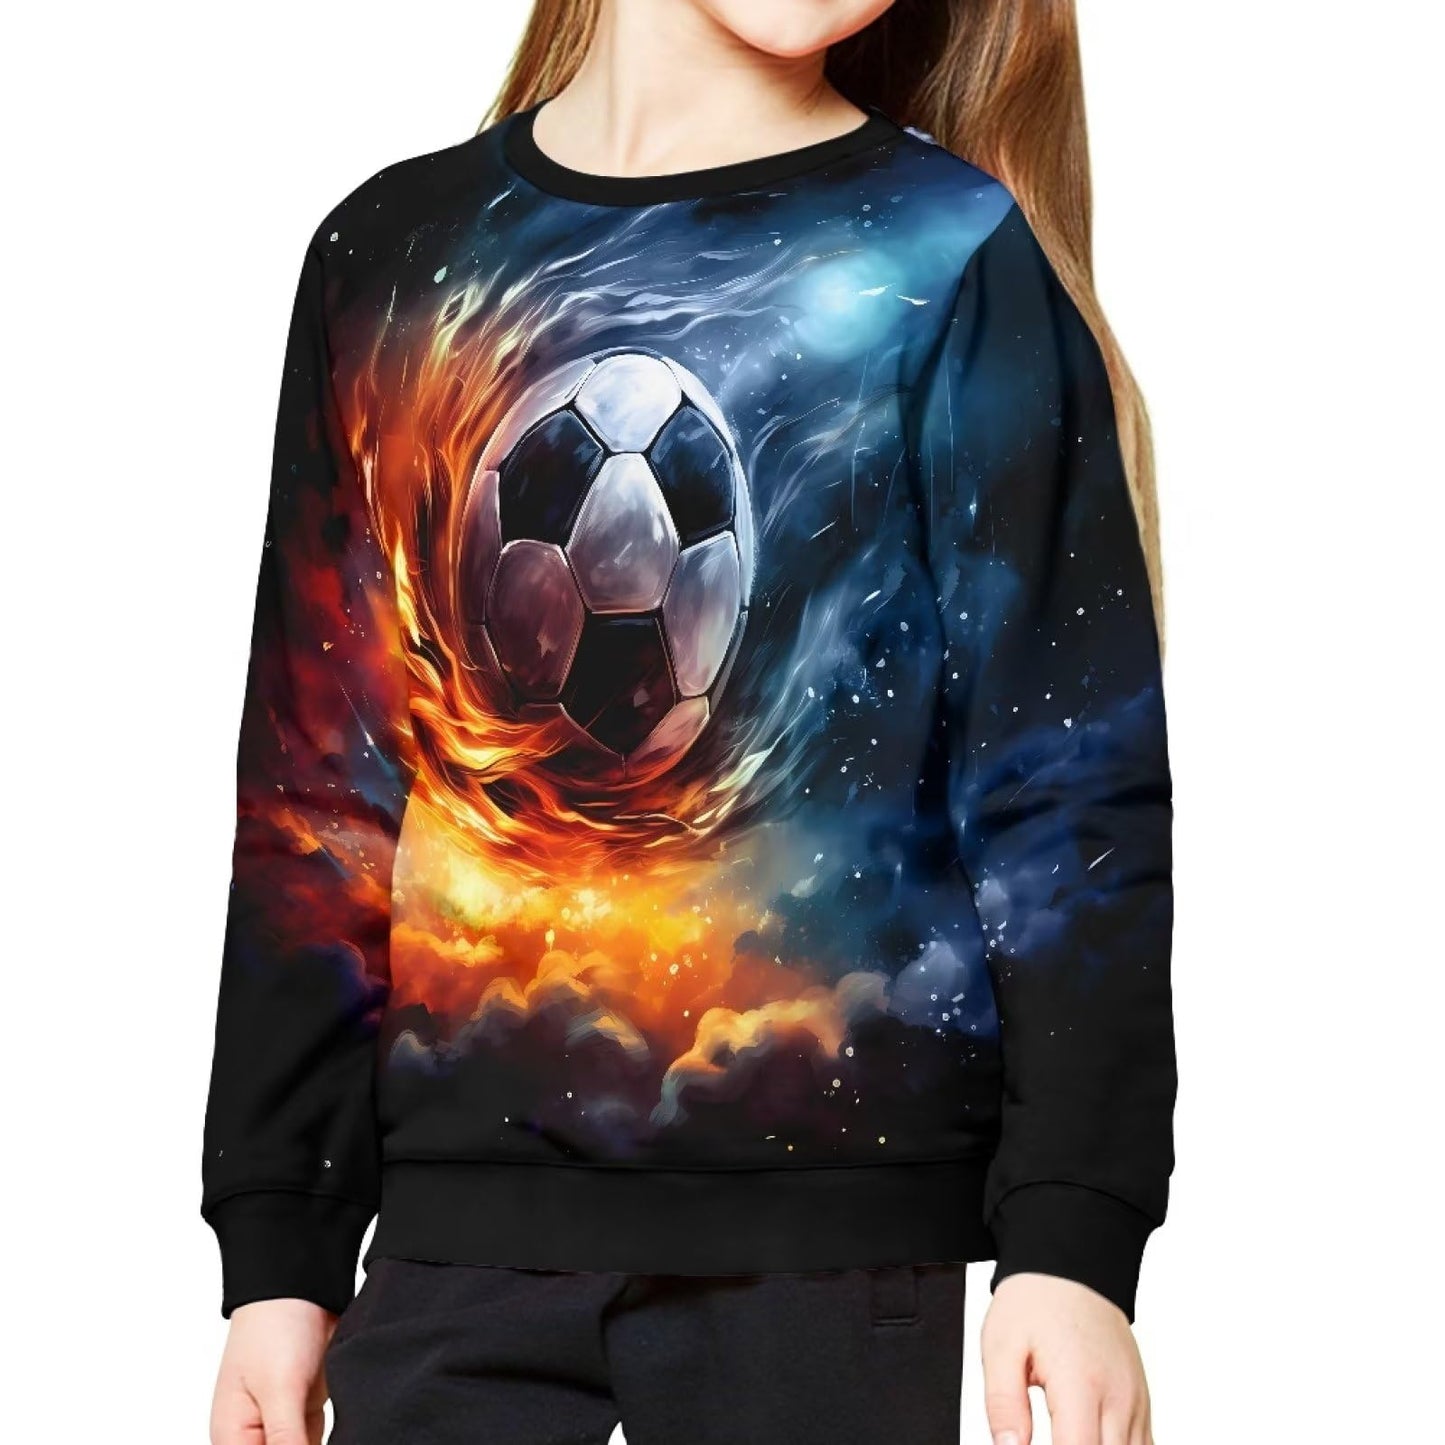 ZPINXIGN Girls Boys Sweatshirt Fall Outfit Kids Comfy Sweaters Pullover Tops 6-14 Years Old